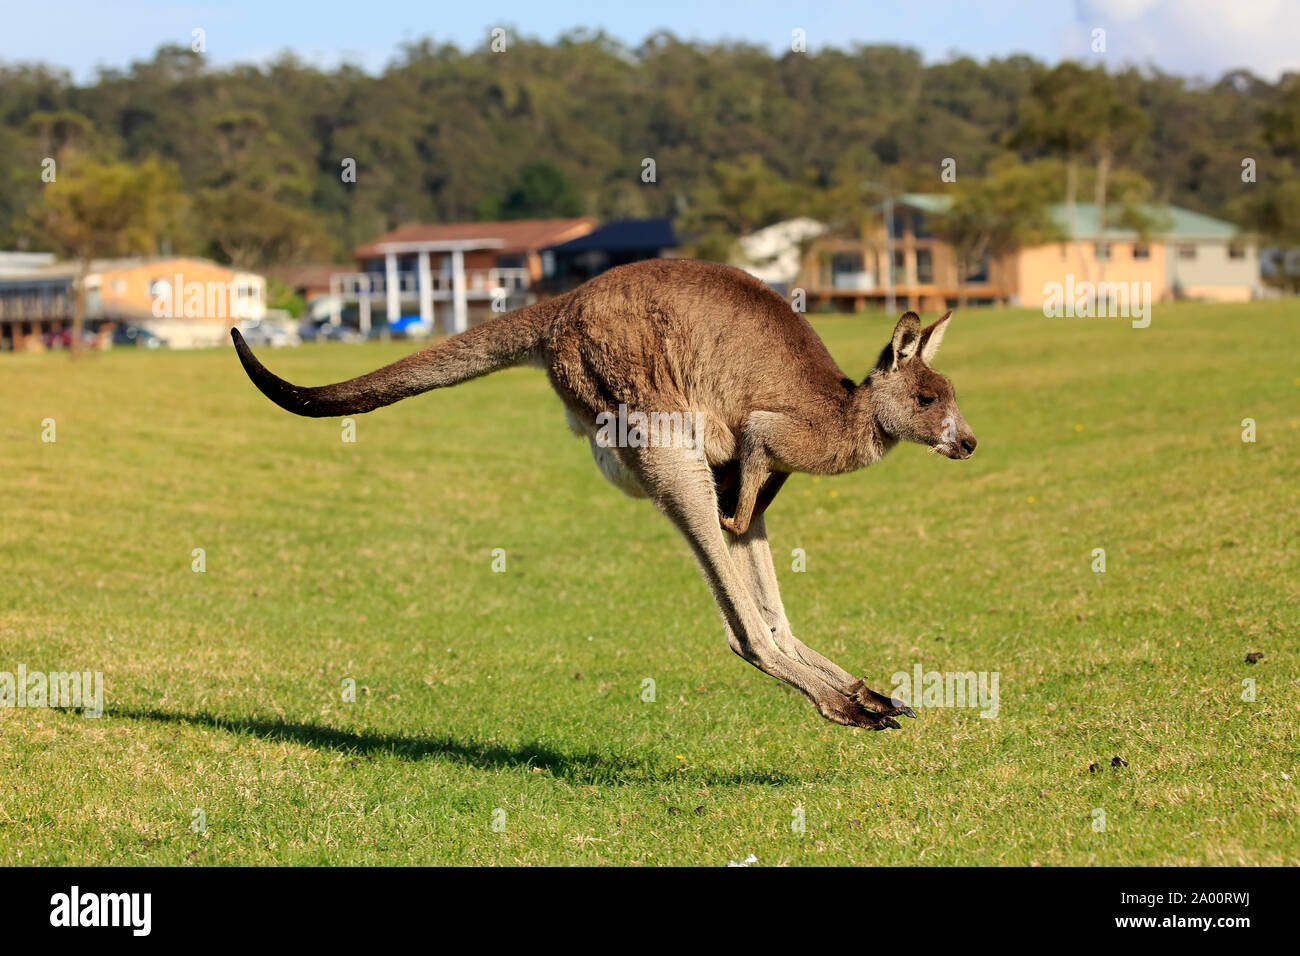 Eastern Grey Kangaroo, female with young in pouch, Maloney Beach, New South Wales, Australia, (Macropus giganteus) Stock Photo